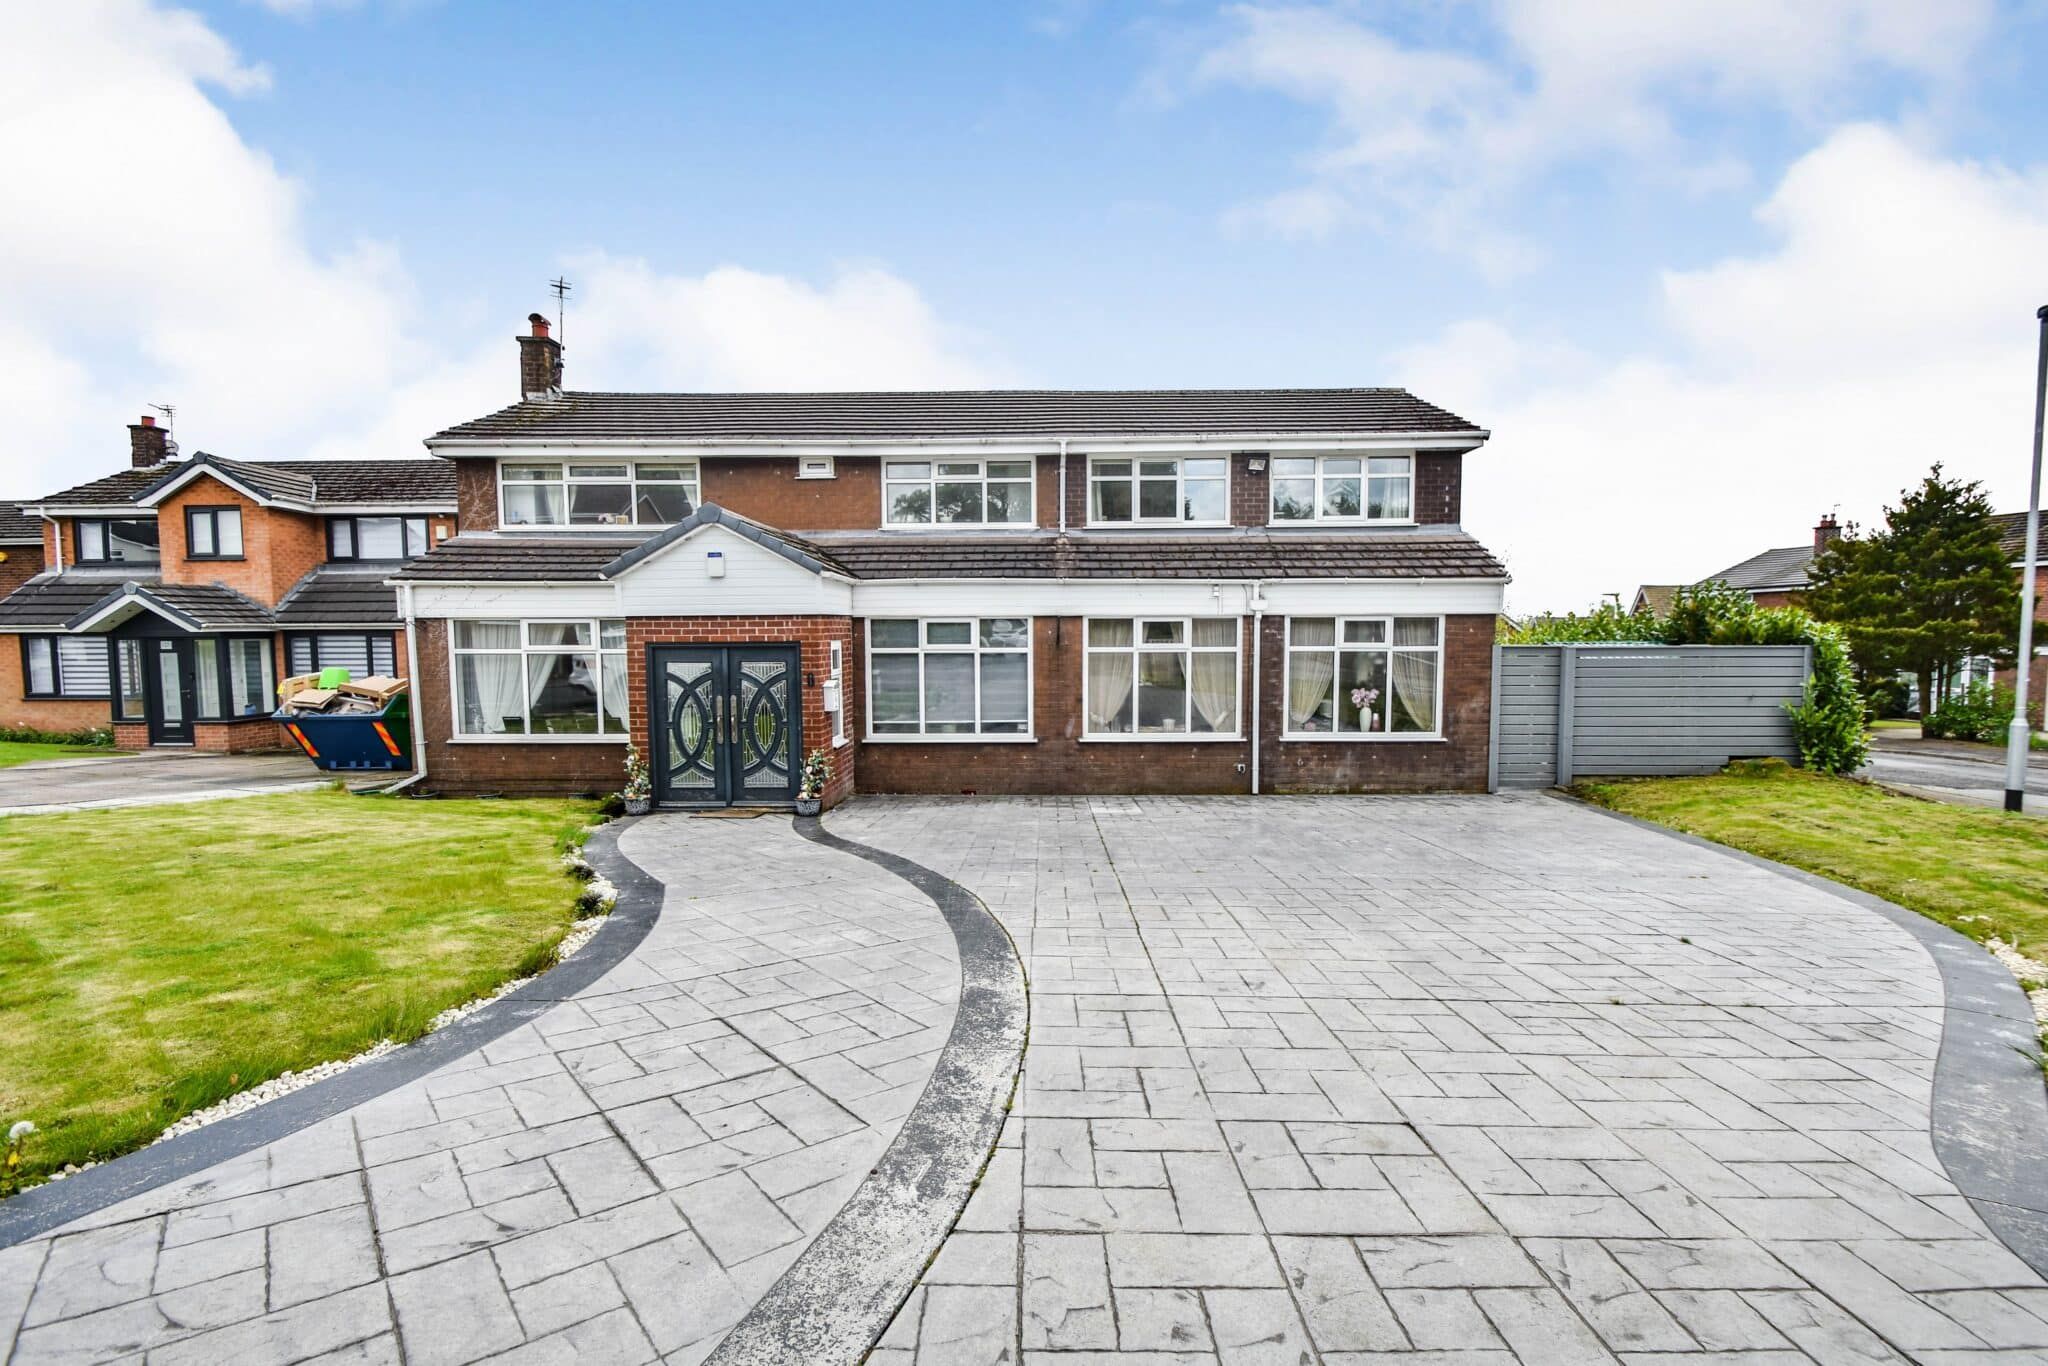 Ringley Drive, Whitefield, Manchester, M45 7LX